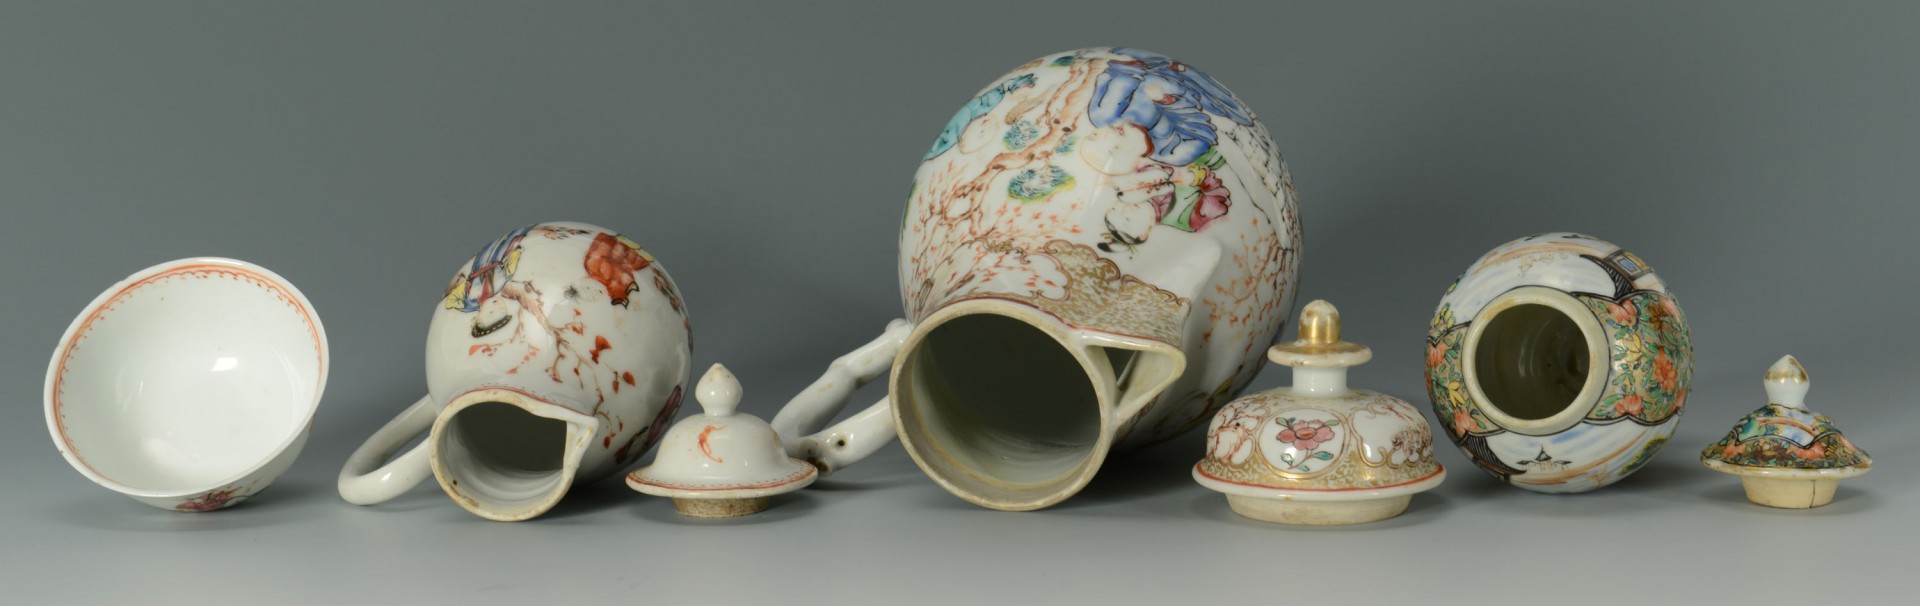 Lot 24: 4 Chinese Famille Rose Export Porcelain Items